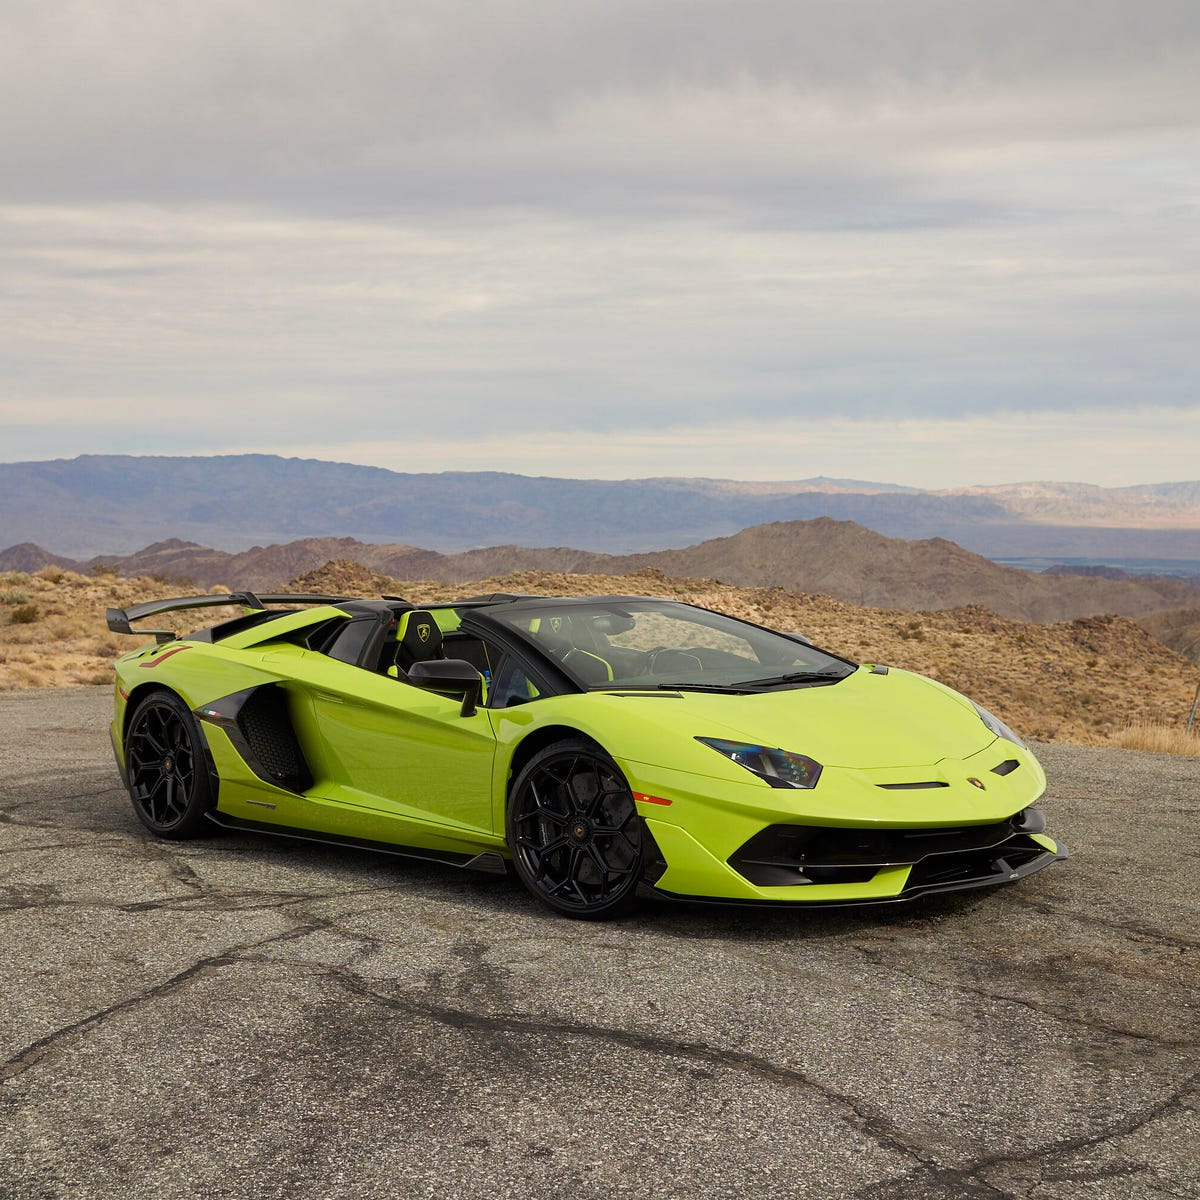 2020 Lamborghini Aventador SVJ Roadster first drive review: Illogical yet  sublime - CNET